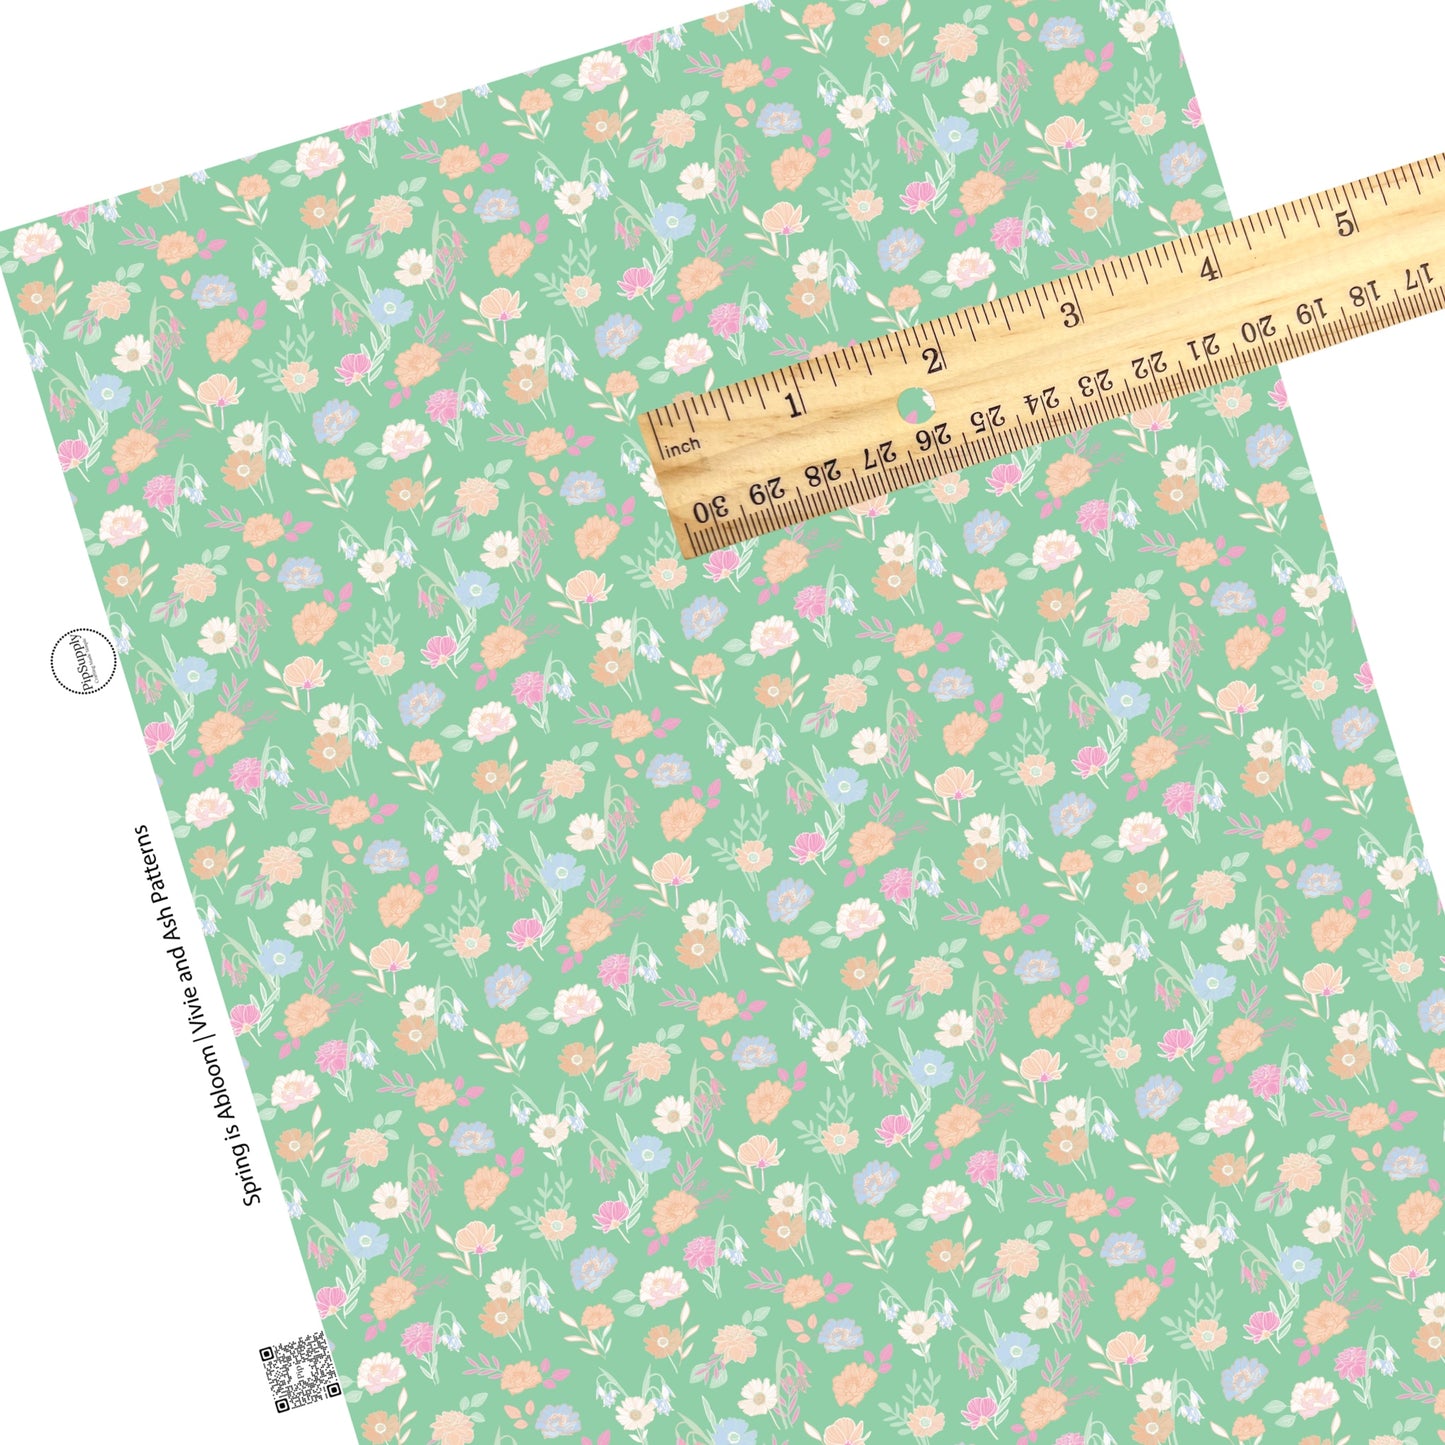 These floral pattern themed faux leather sheets contain the following design elements: pink, orange, and cream flowers on green. Our CPSIA compliant faux leather sheets or rolls can be used for all types of crafting projects.